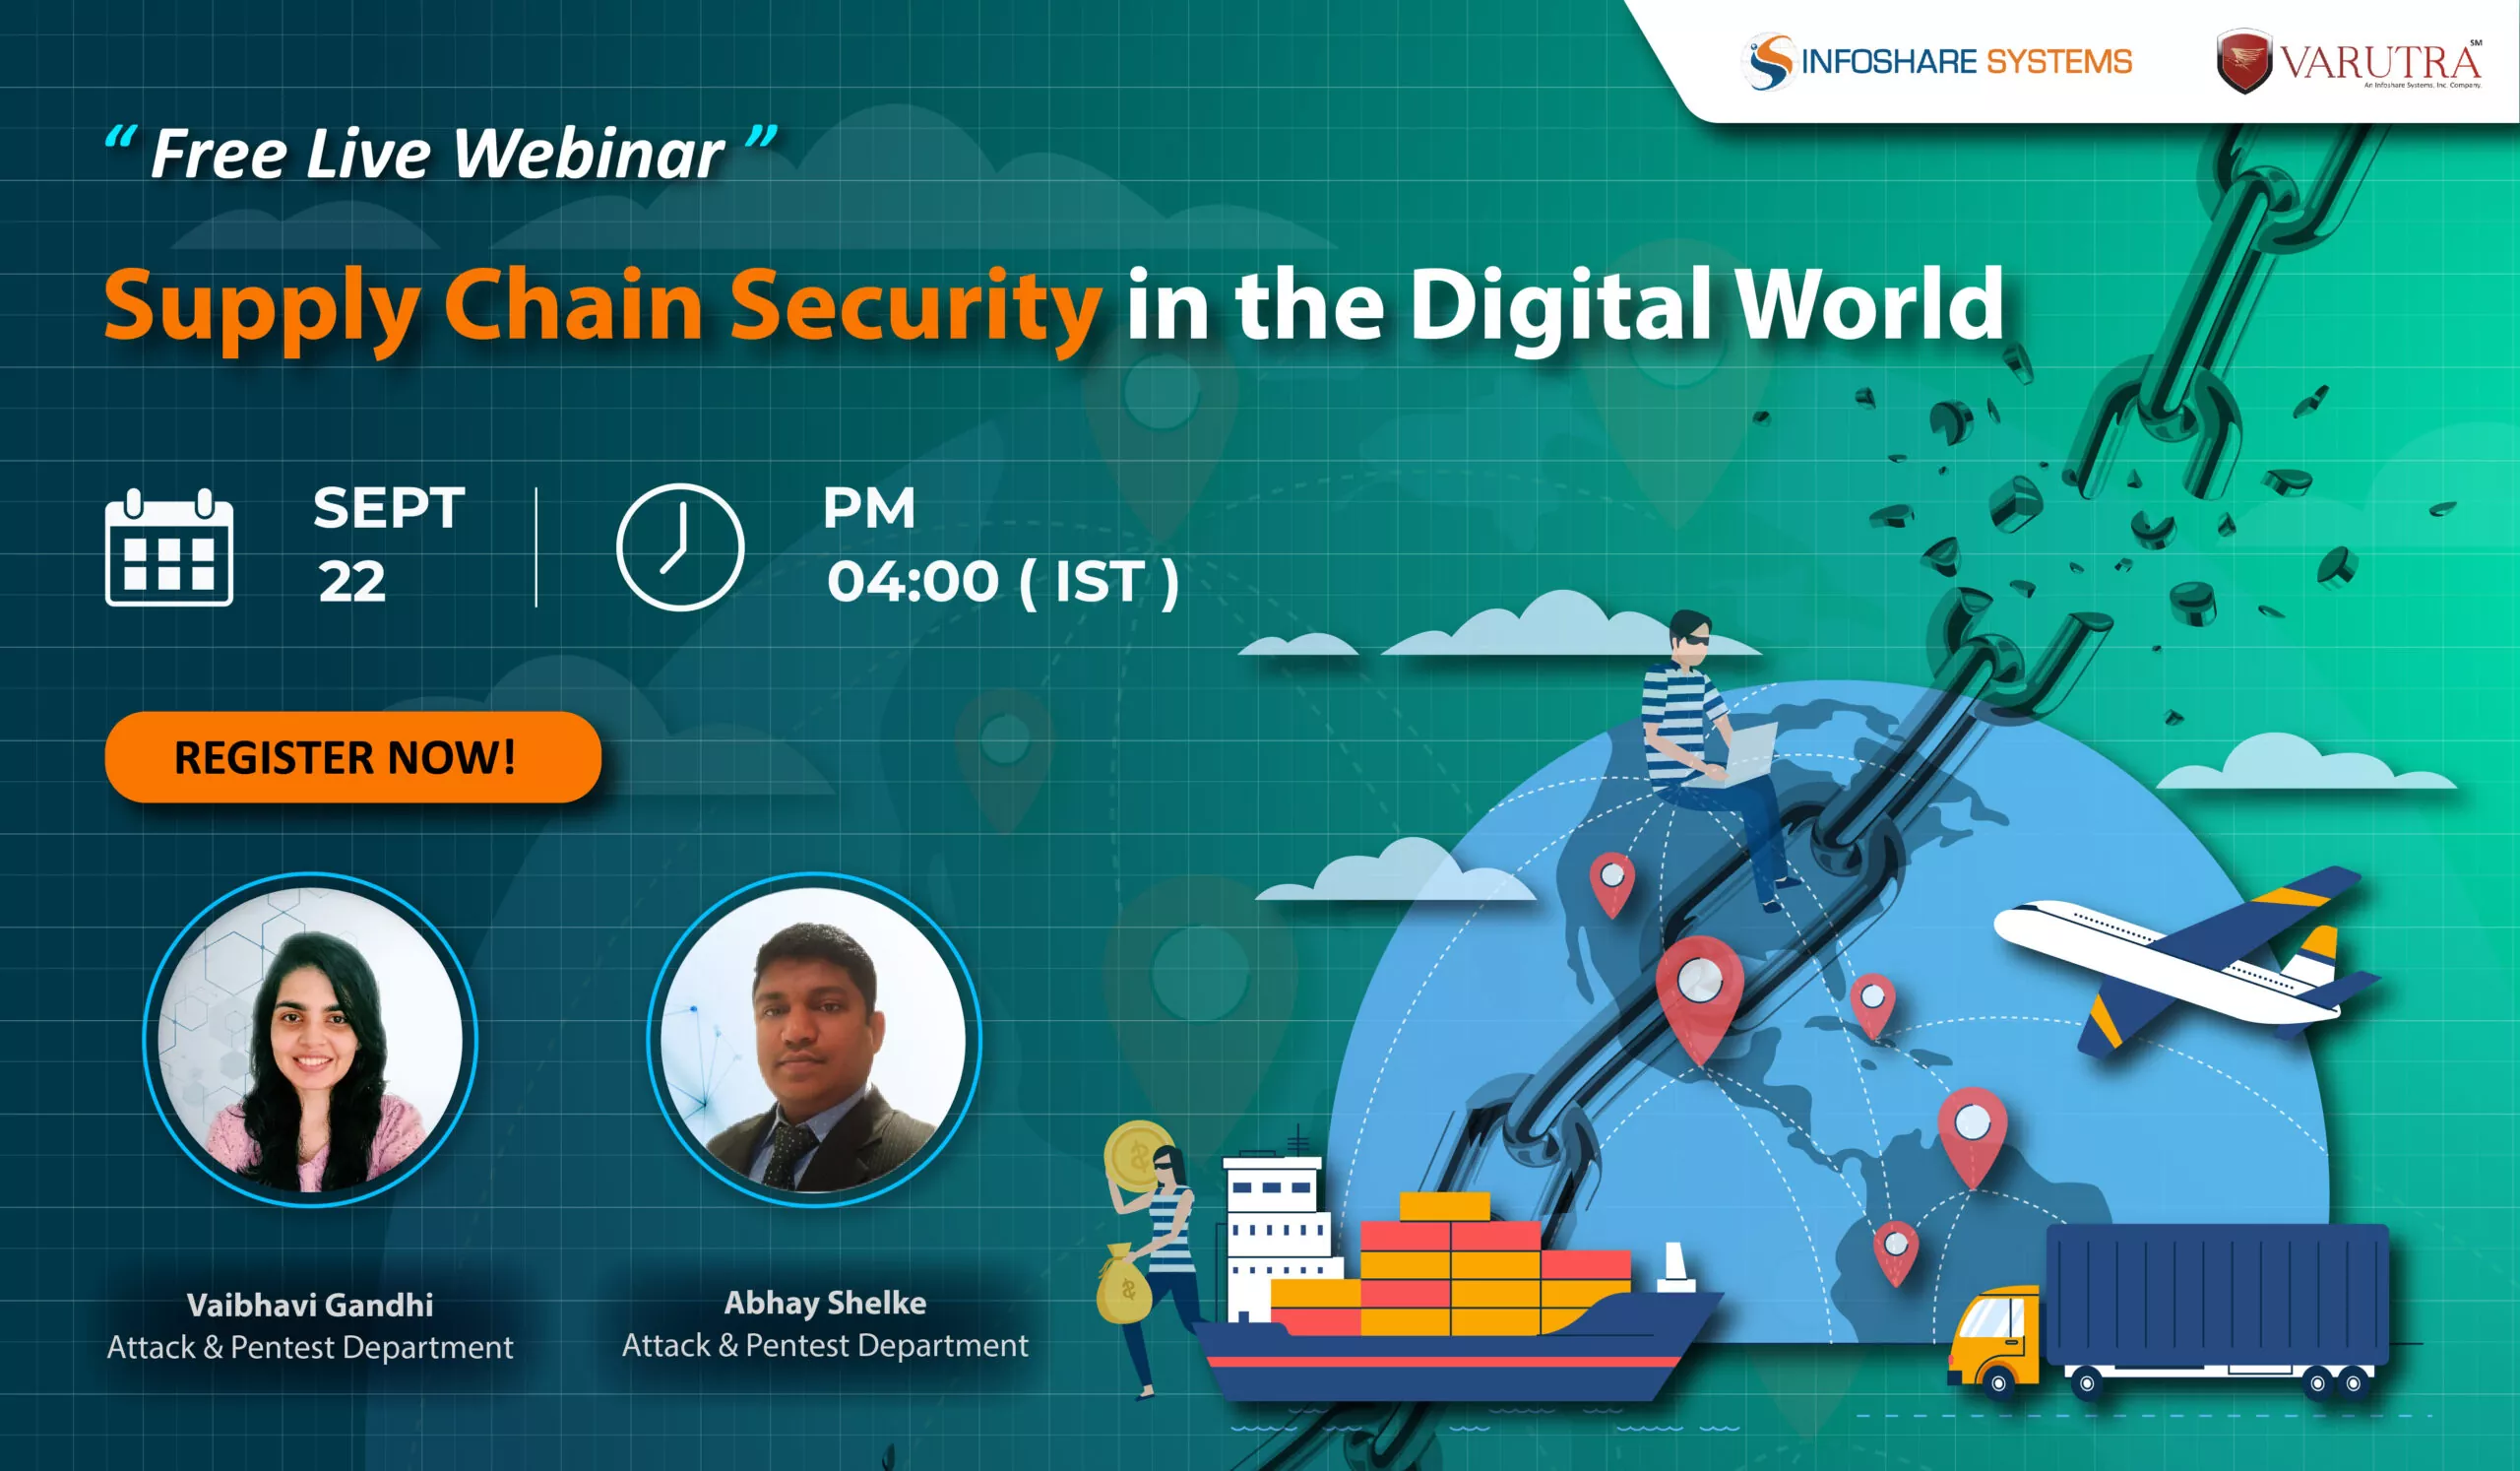 https://www.varutra.com/company-events/supply-chain-security-in-the-digital-world/